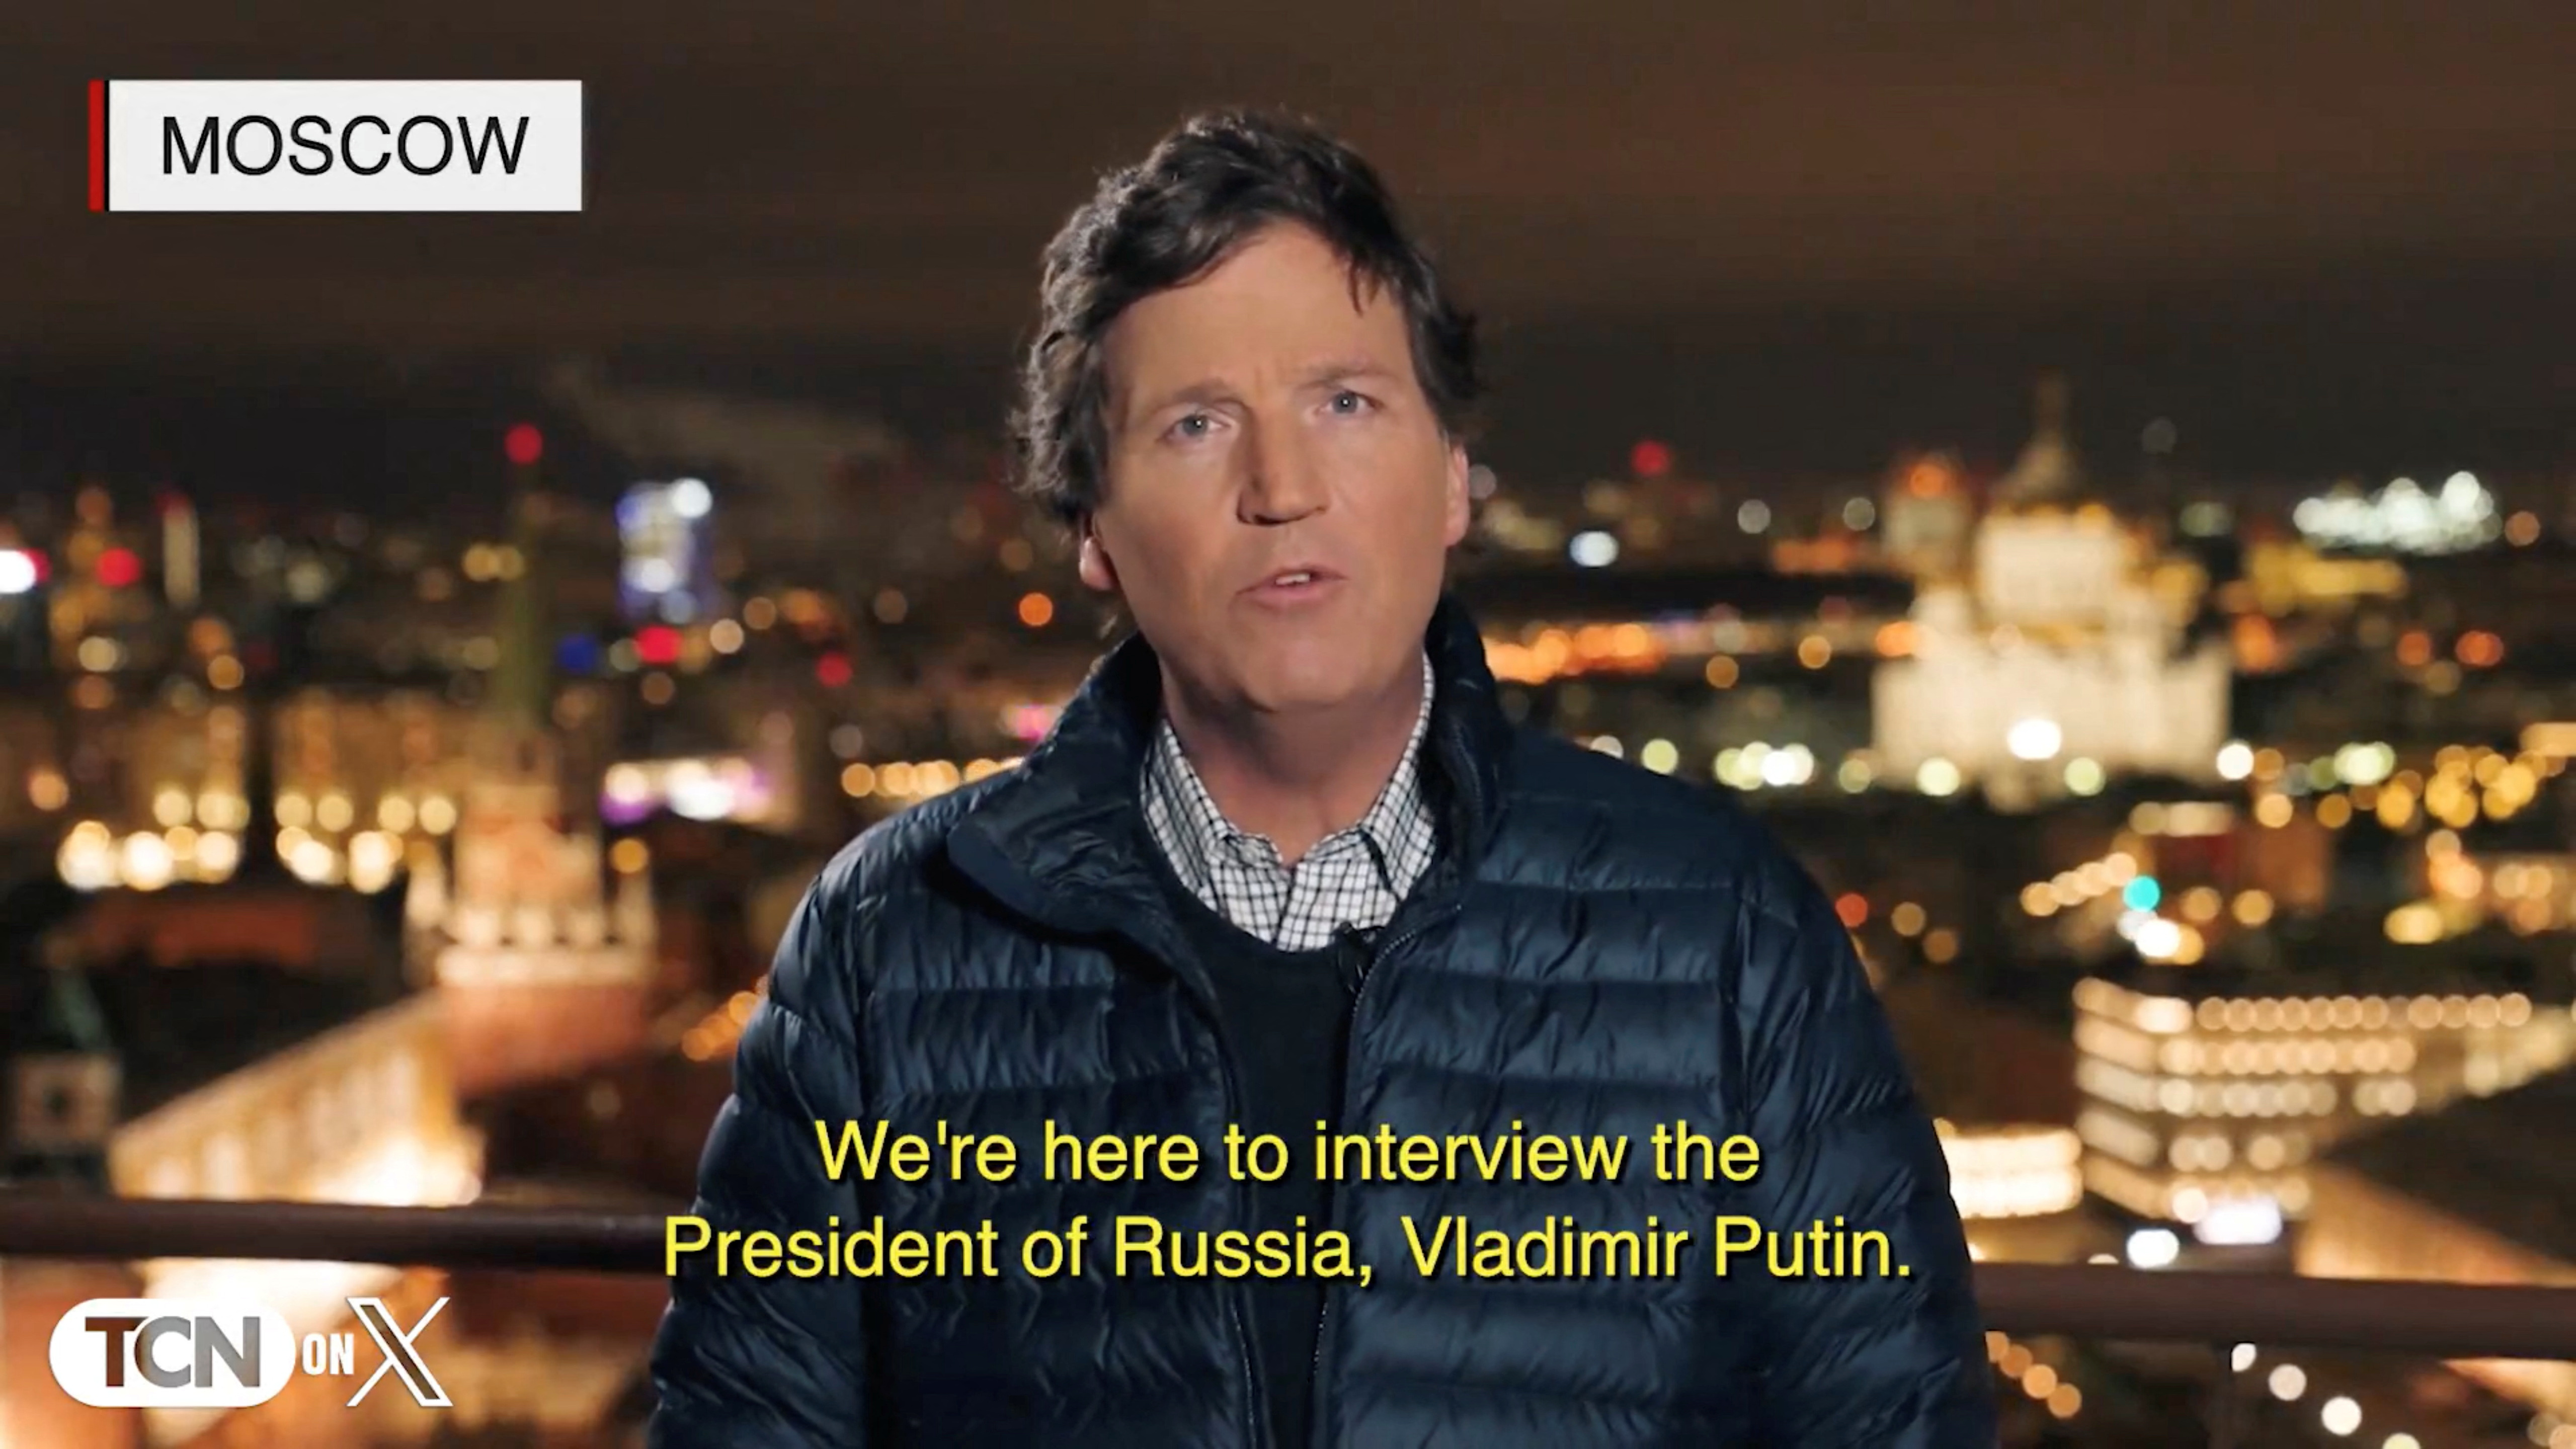 U.S. media personality Carlson speaks about his interview with Russian President Putin in Moscow